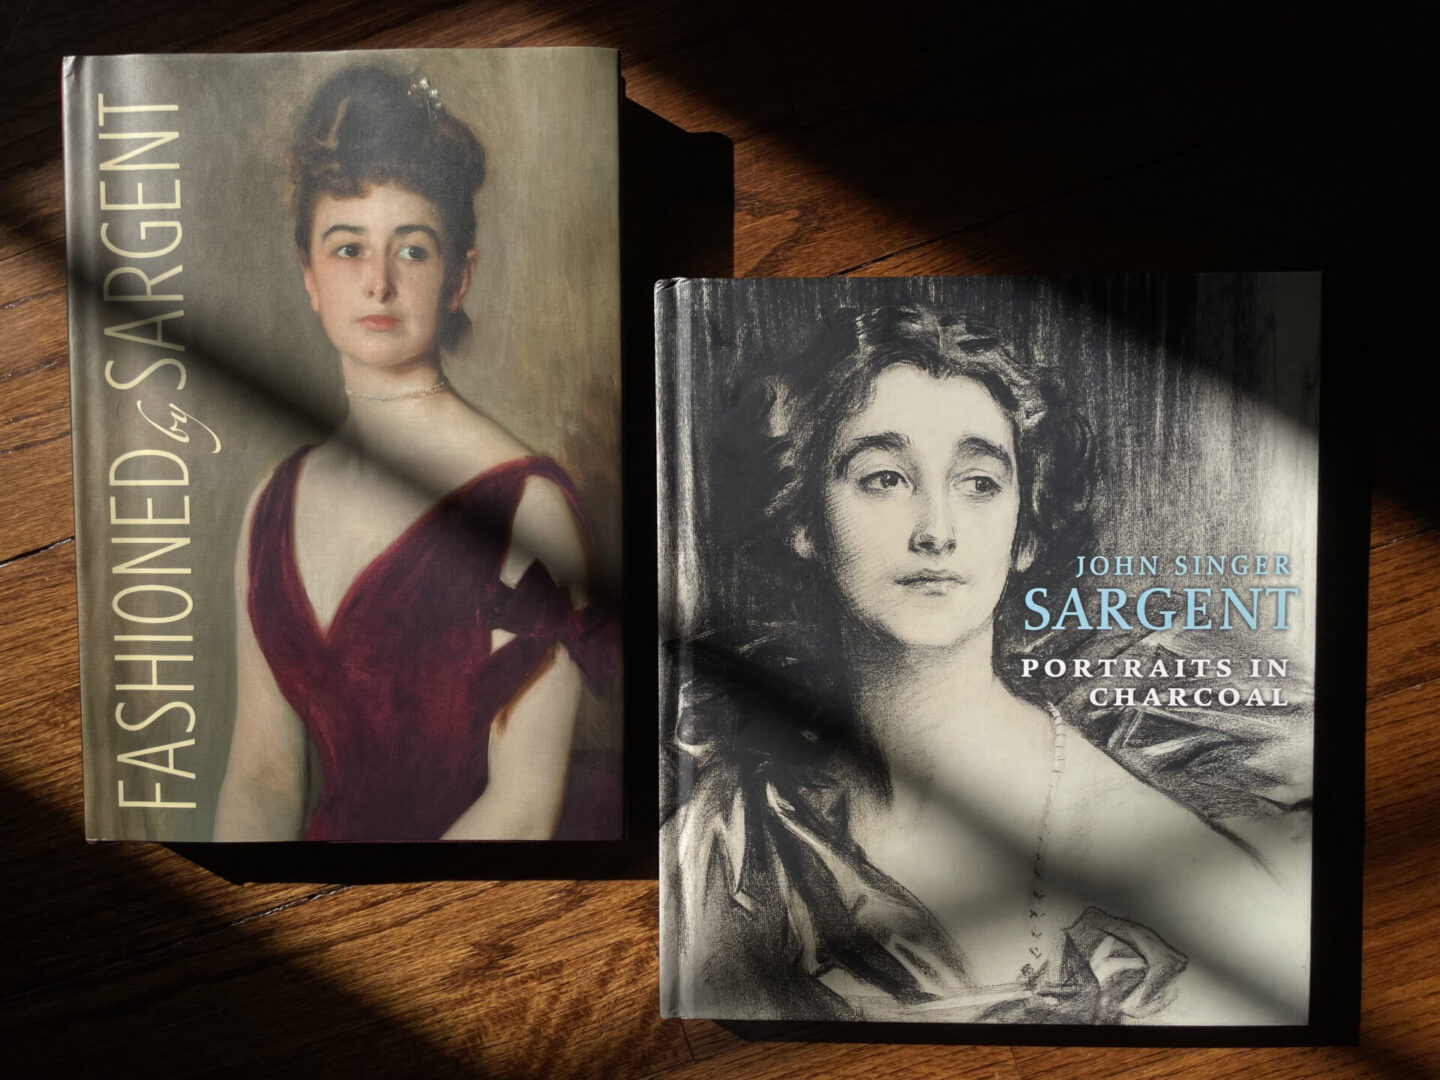 Two books on women 's fashion and beauty.